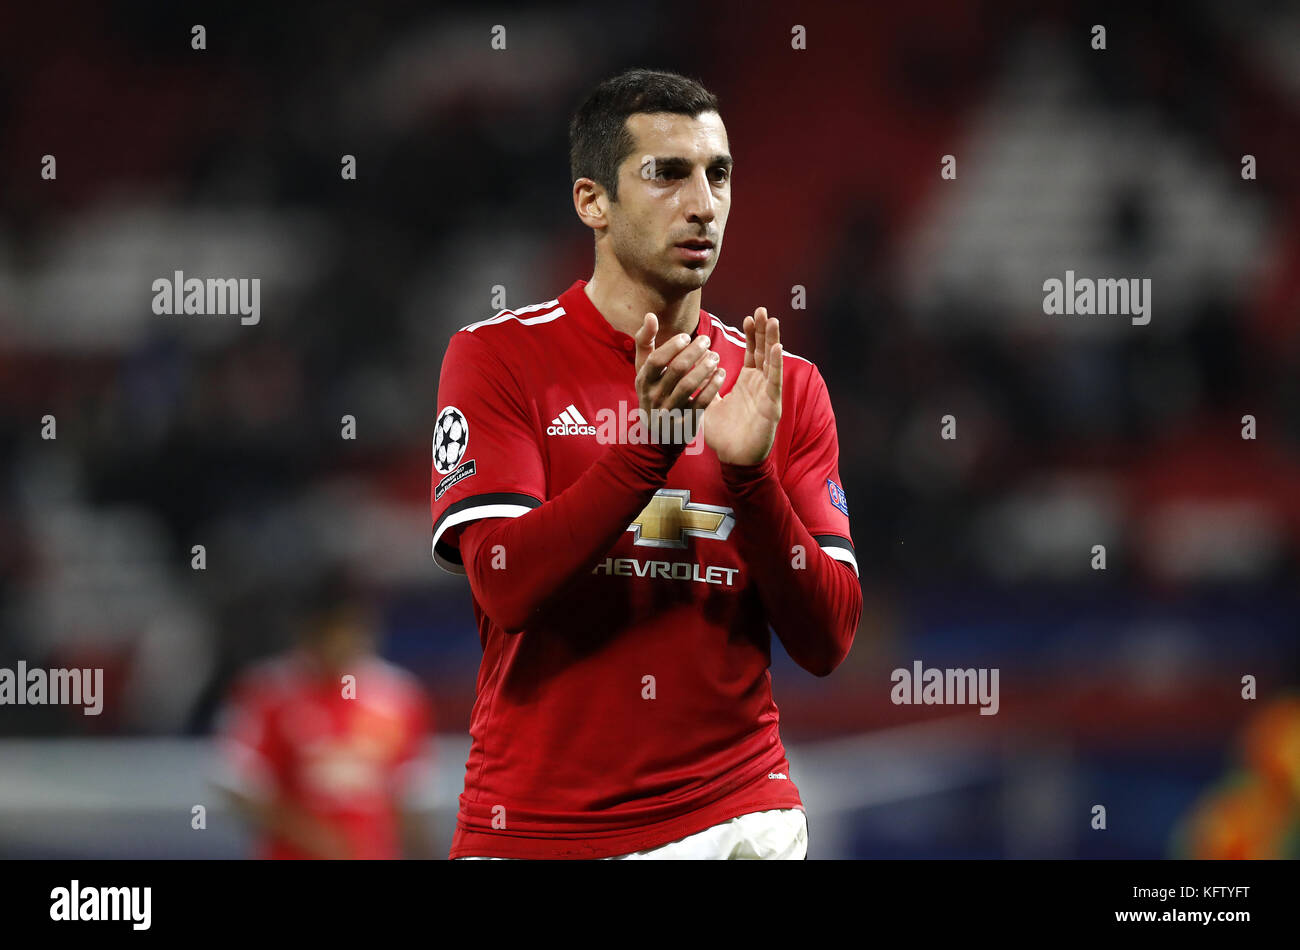 Manchester United's Henrikh Mkhitaryan during the UEFA Champions League,  Group A match at Old Trafford, Manchester. PRESS ASSOCIATION Photo. Picture  date: Tuesday October 31, 2017. See PA story soccer Man Utd. Photo